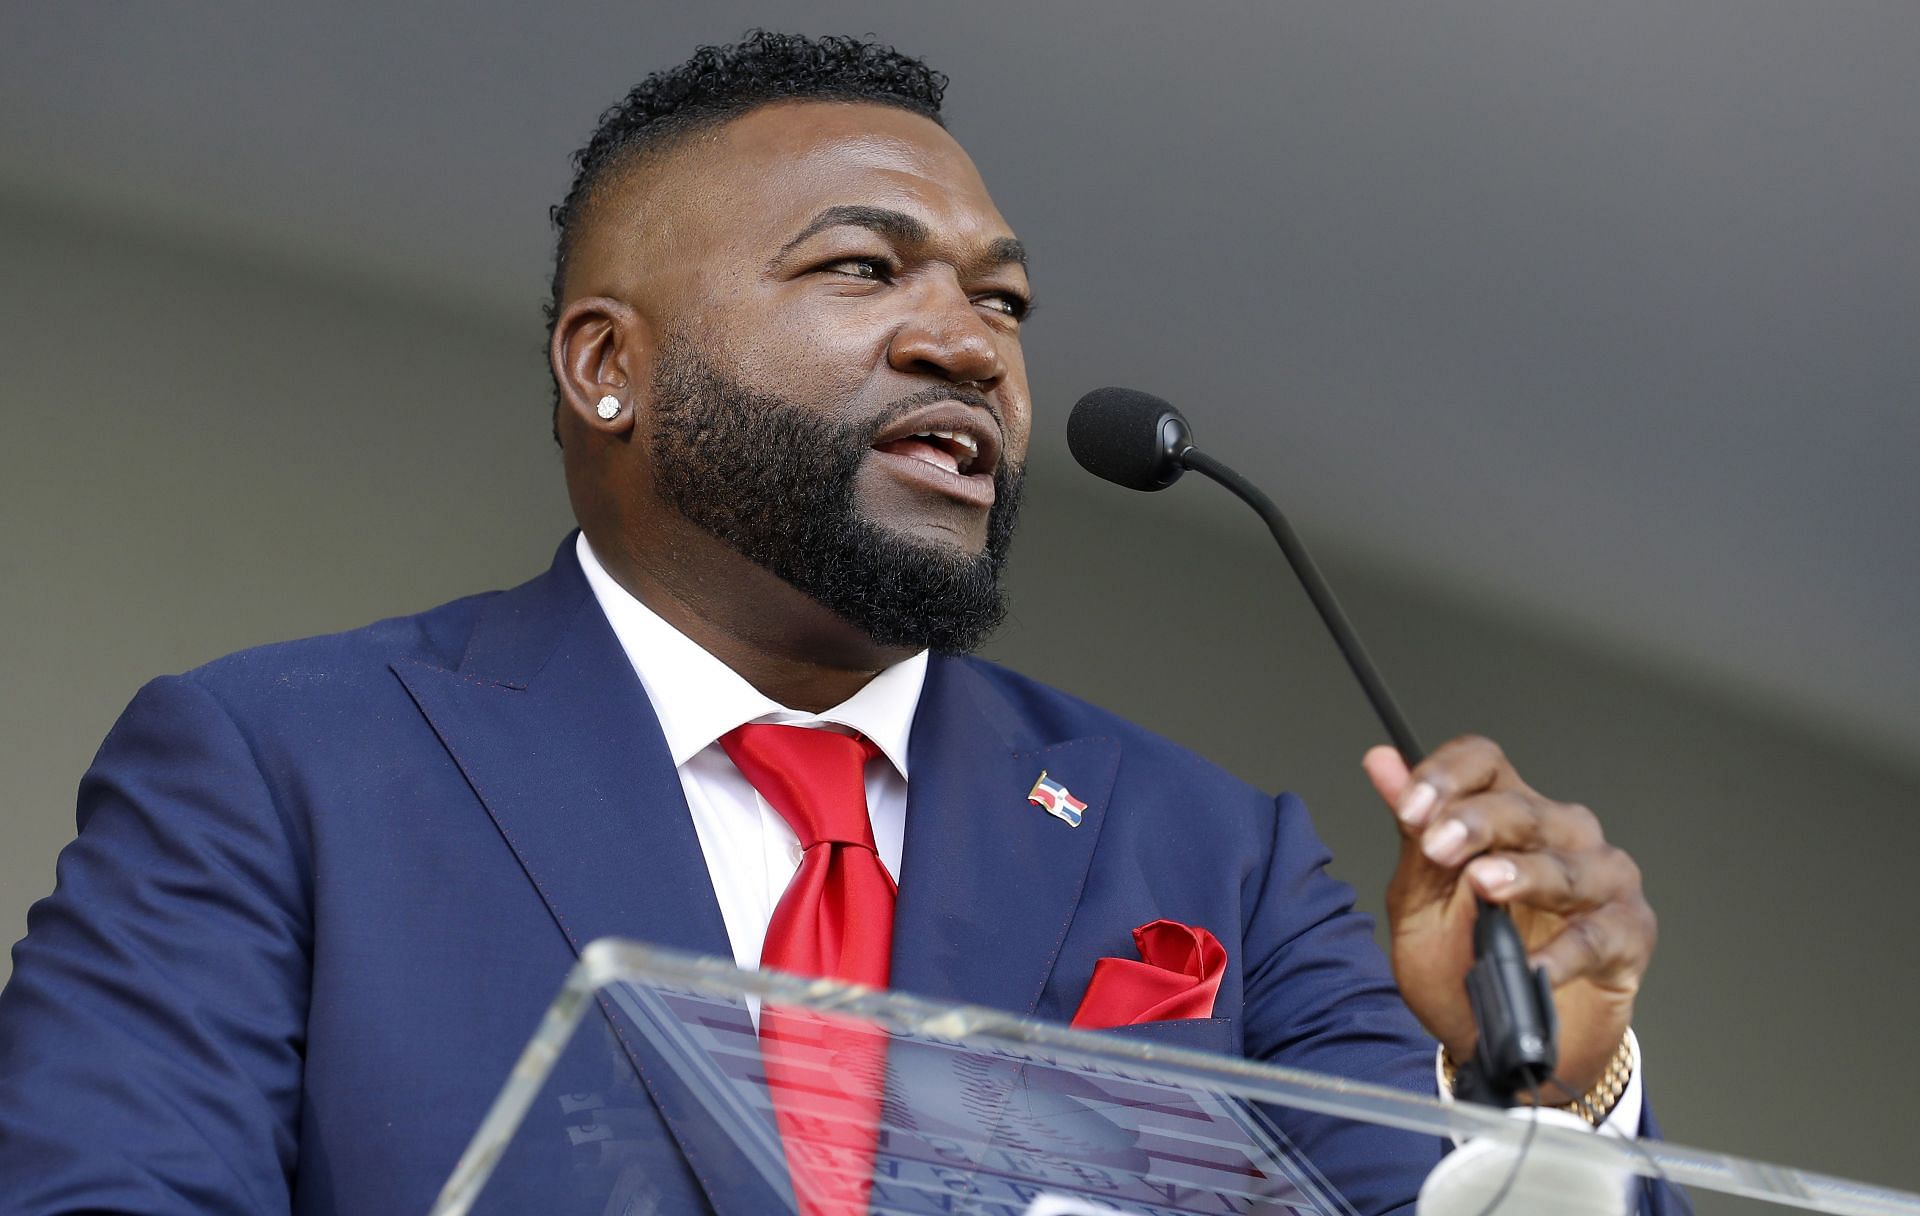 David Ortiz was inducted earlier this year into the Baseball Hall of Fame